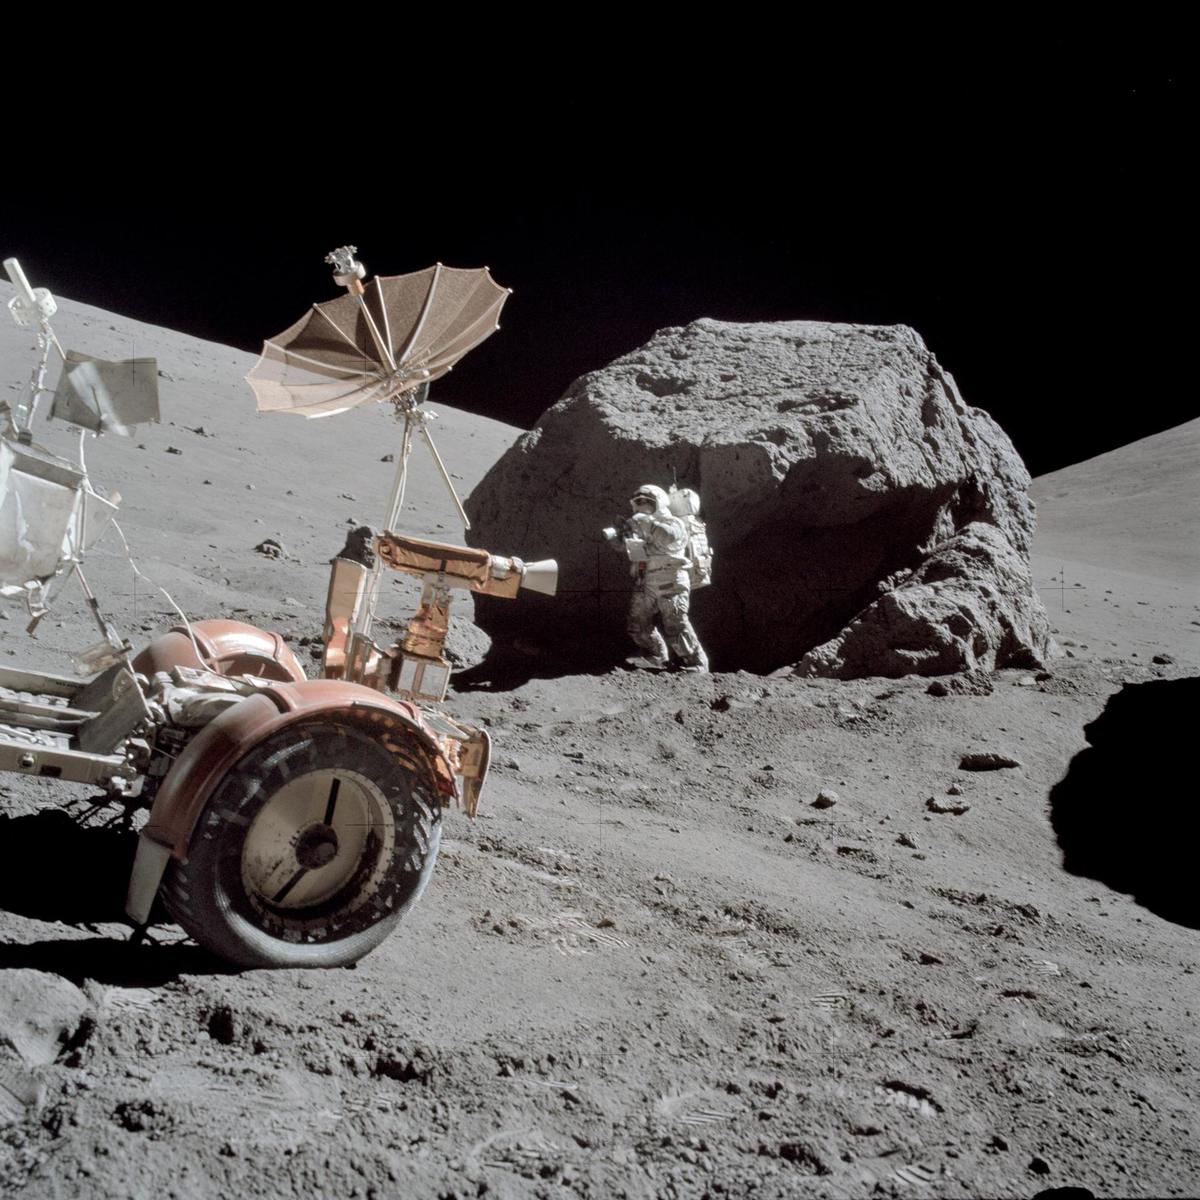 Scientist-astronaut Harrison H. Schmitt is photographed working beside a huge boulder at Station 6 (base of North Massif) on the moon during the Apollo 17 expedition in 1972